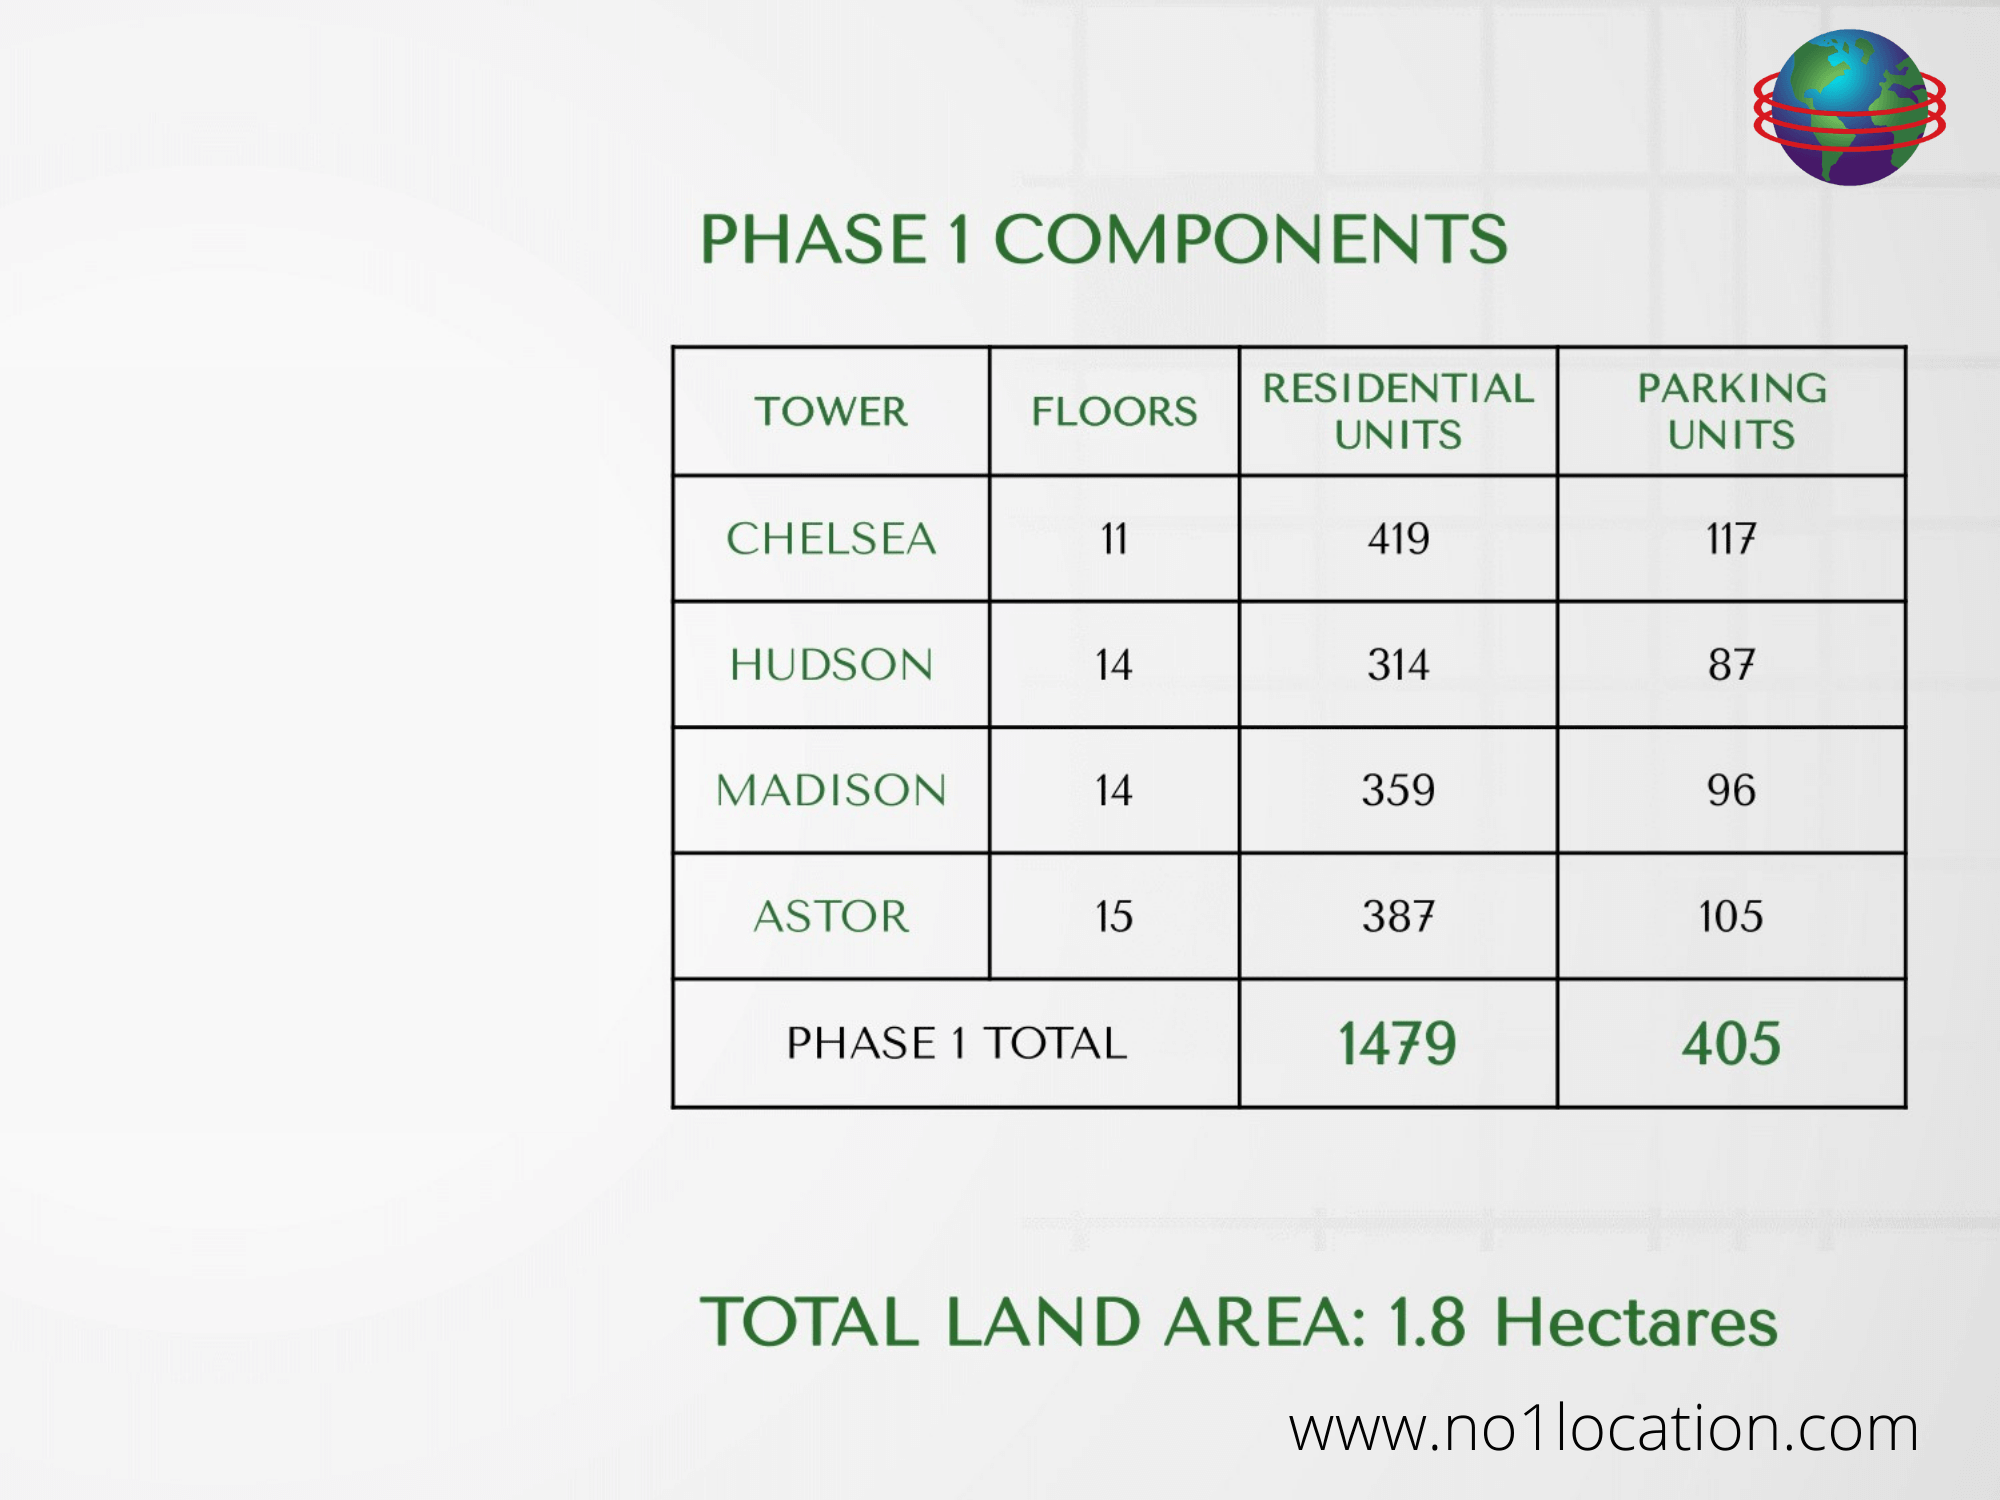 the east vllage dgt phase 1 total land area